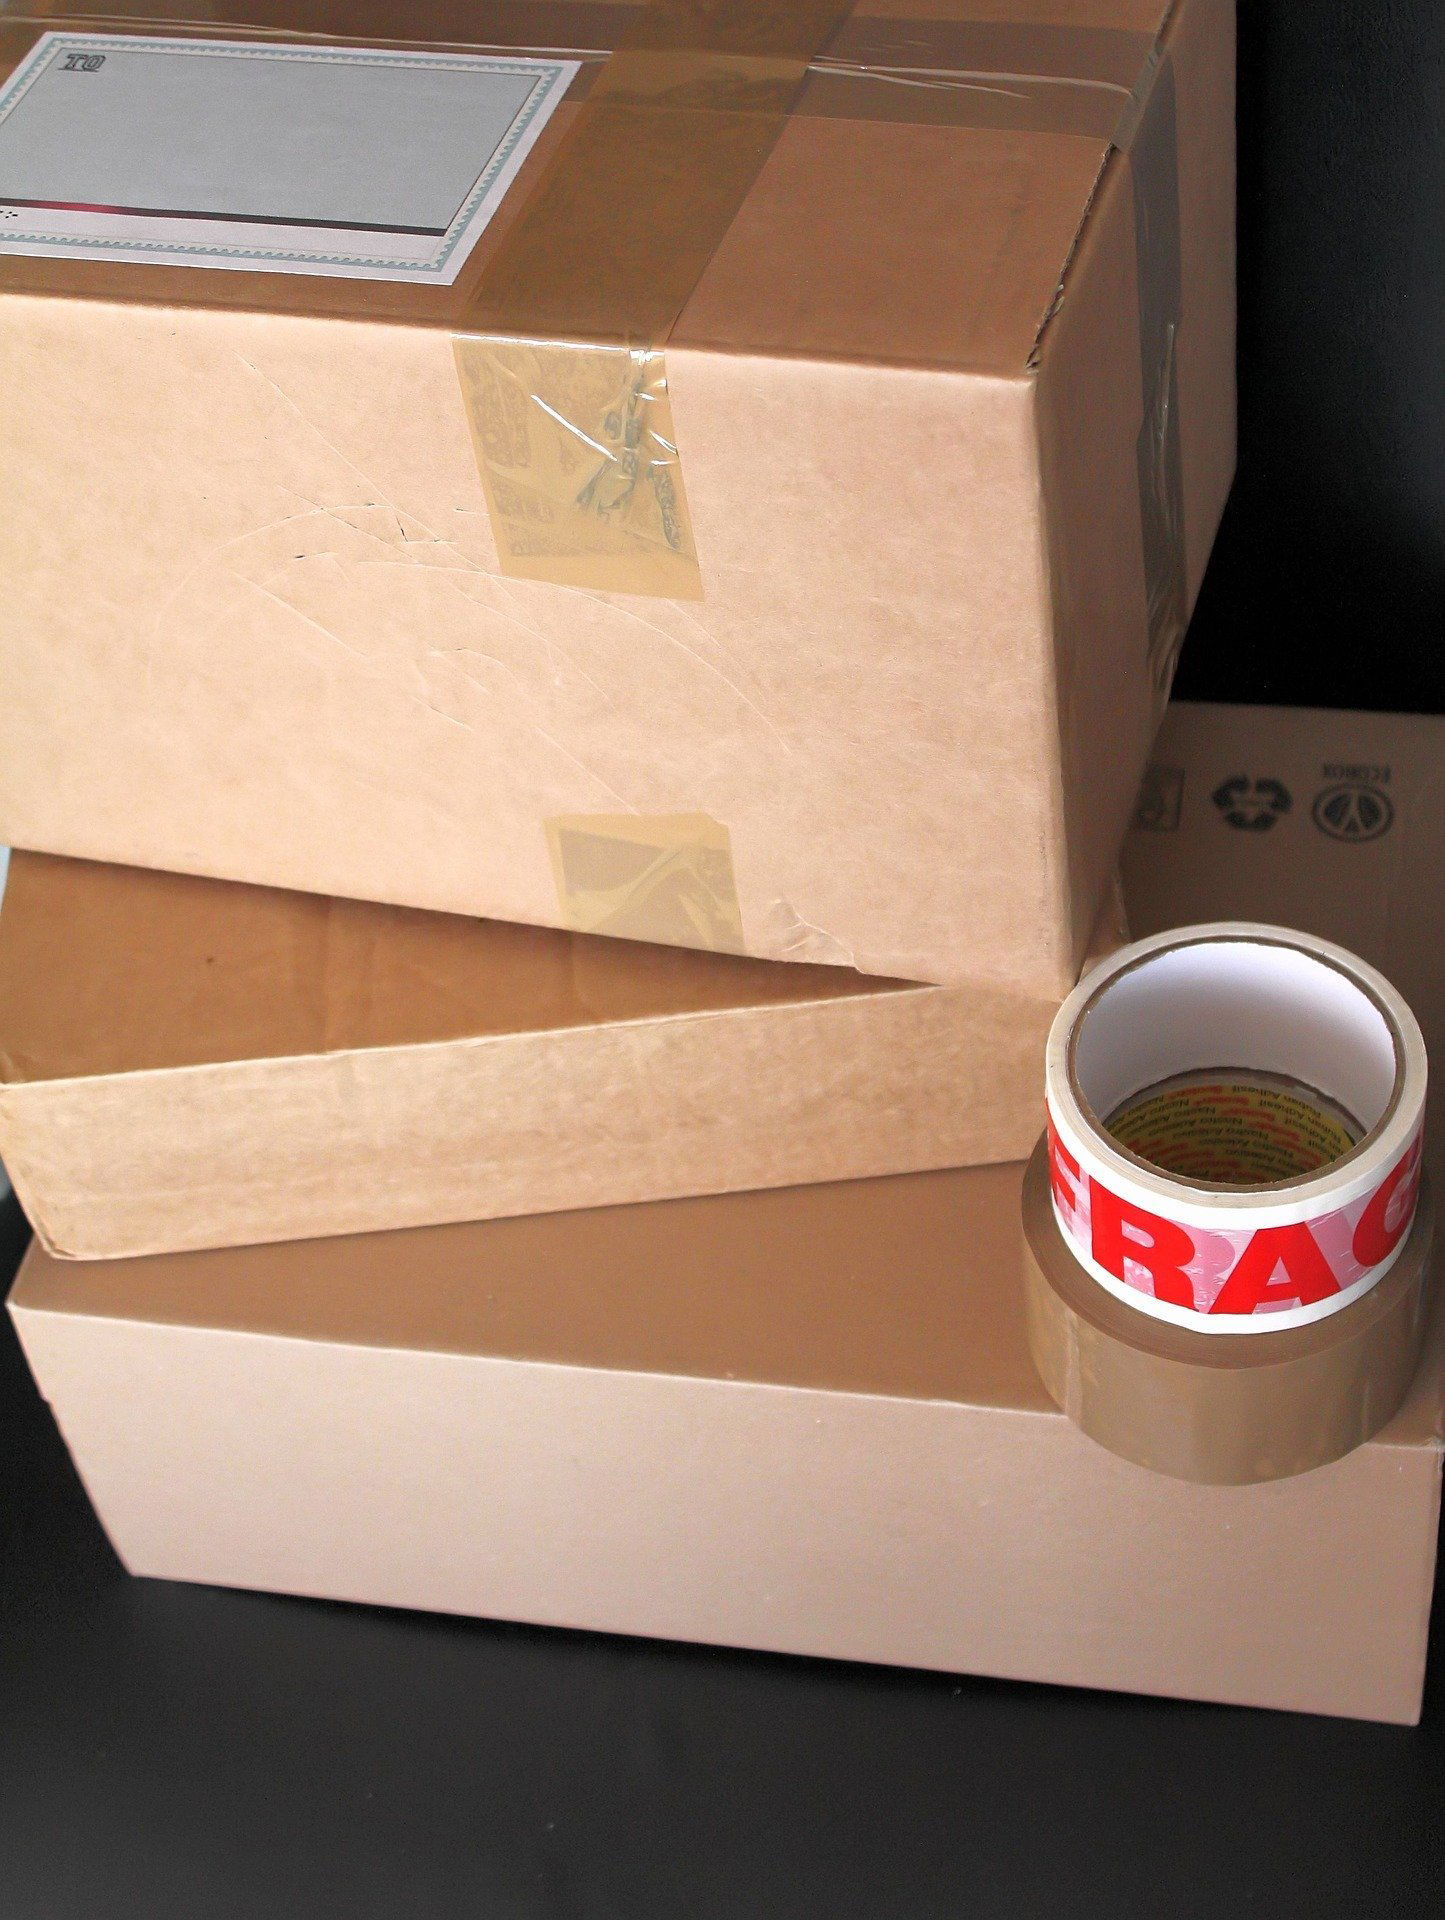 packing international shipments to ensure that they arrive safely: